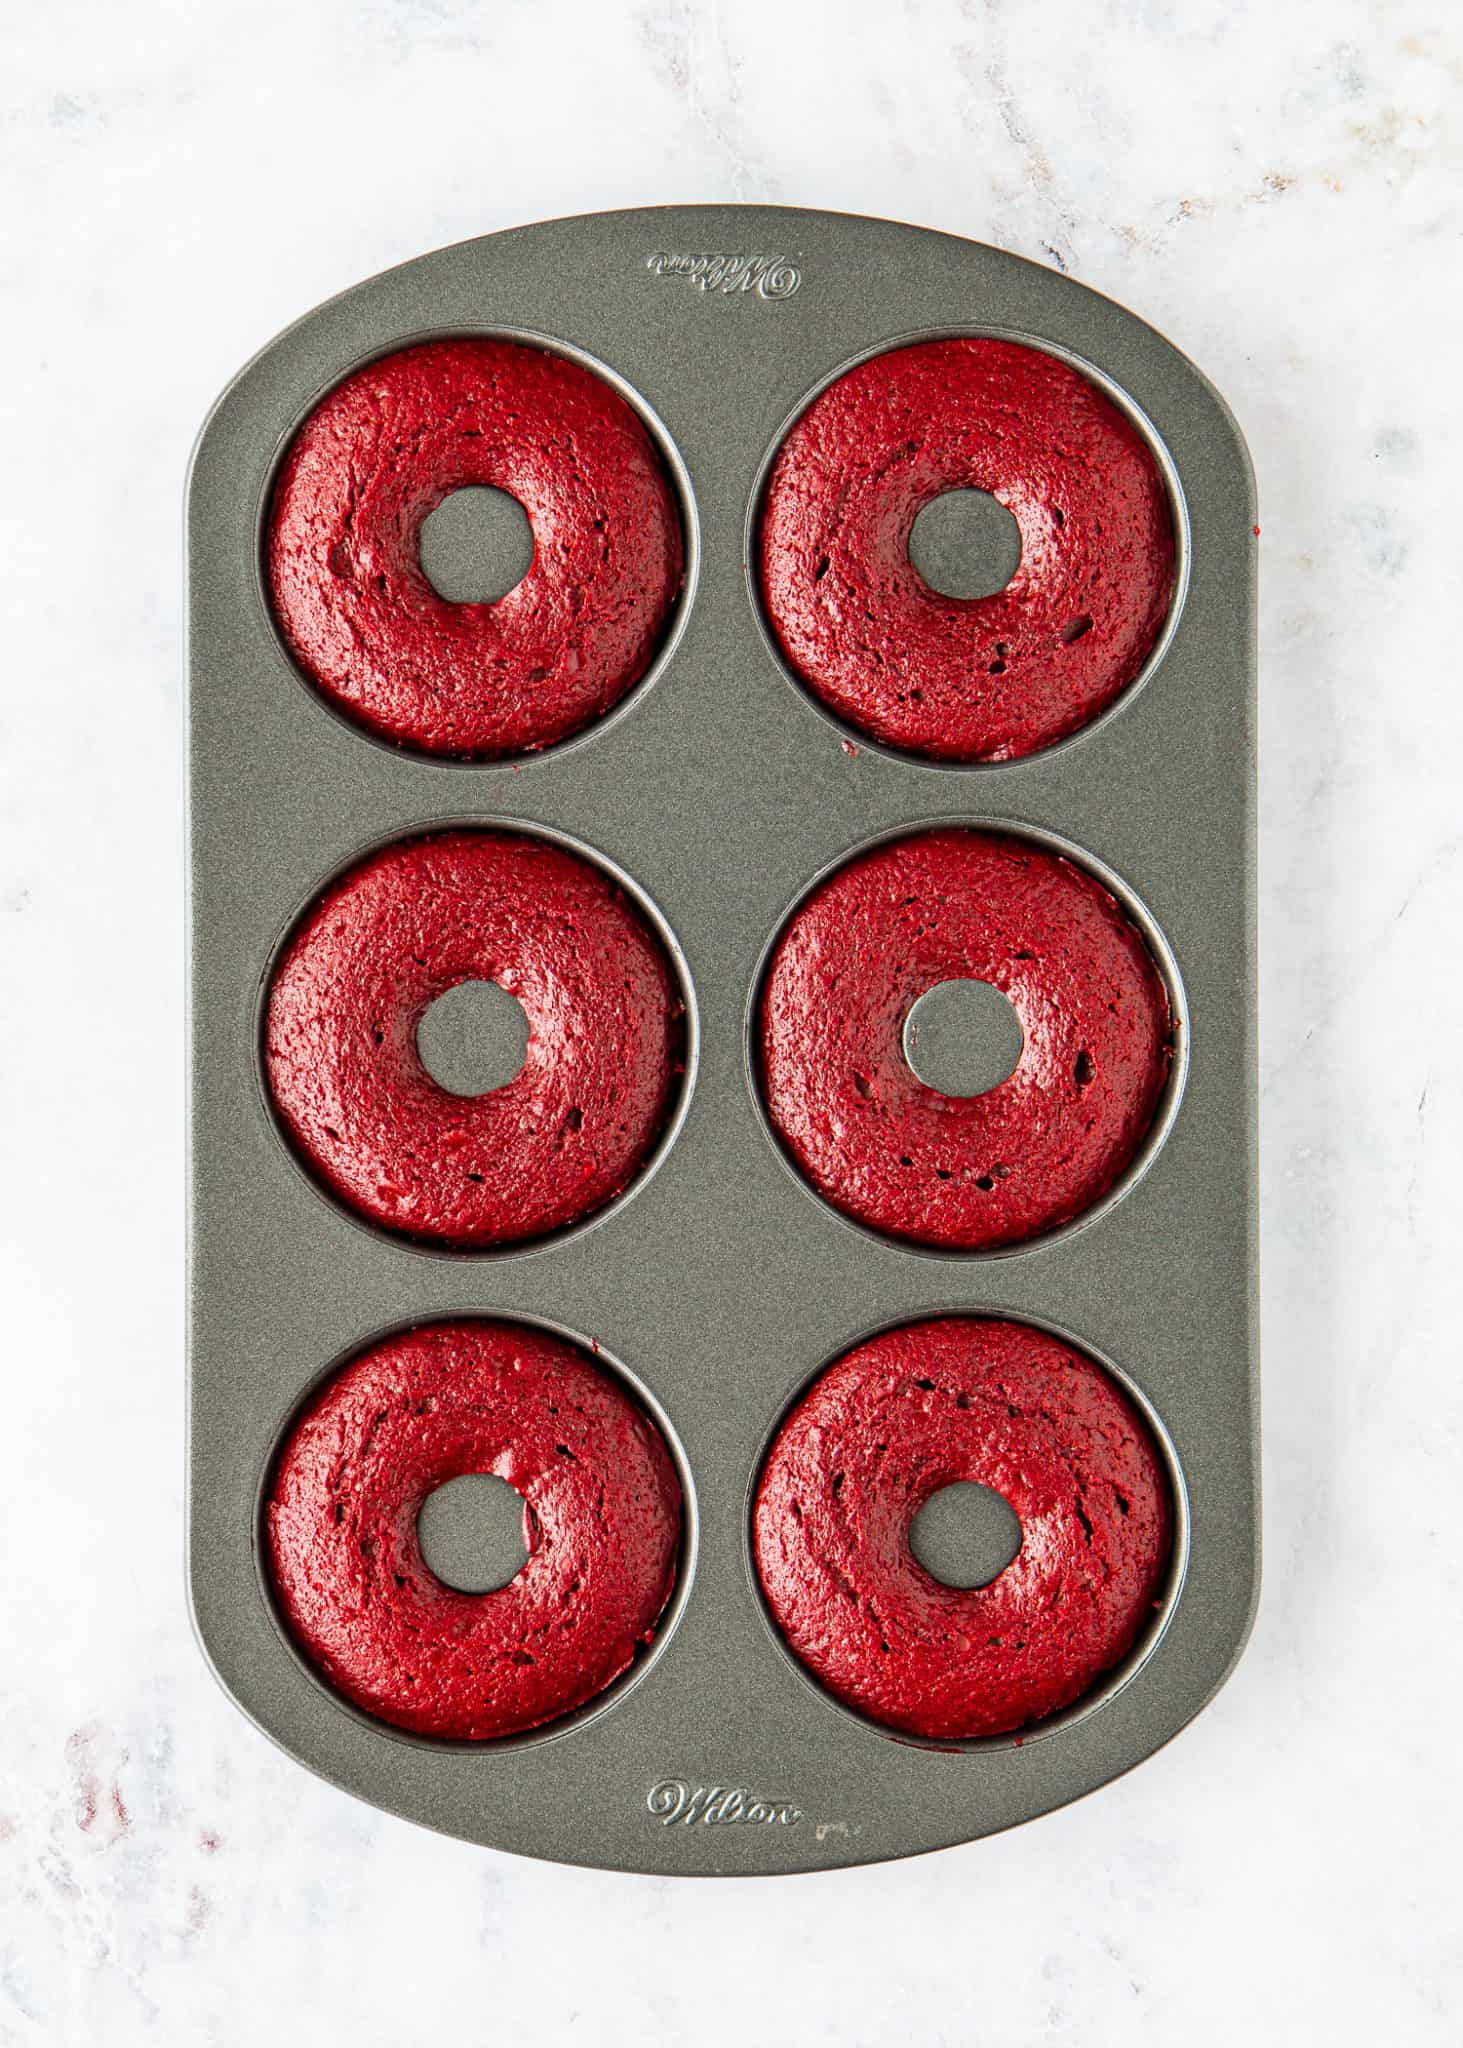 Easy Eggless Red Velvet Donuts Mommy S Home Cooking